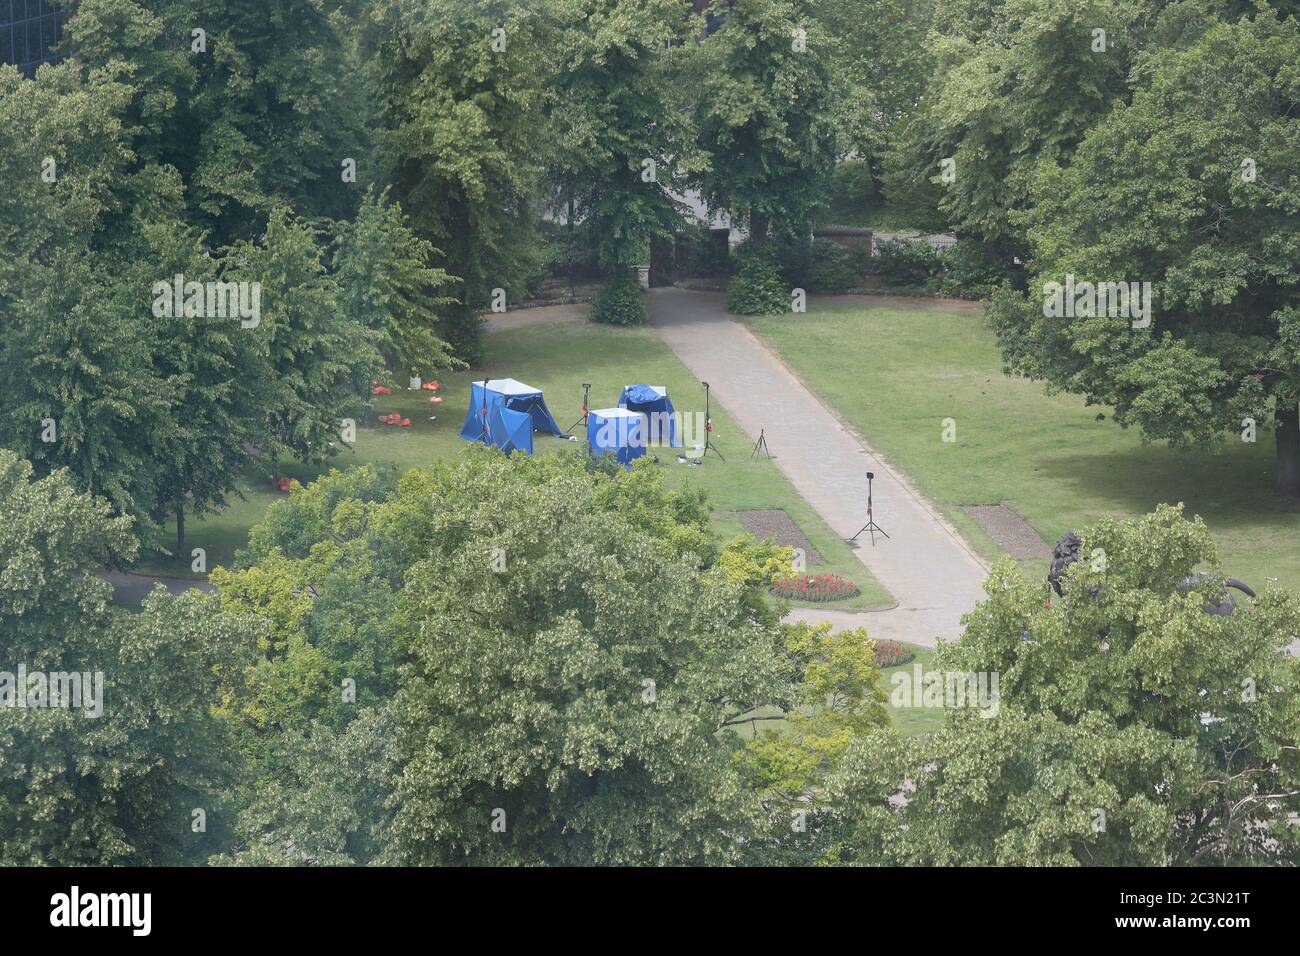 Police tents in Forbury Gardens in Reading town centre at the scene of a multiple stabbing attack which took place at around 7pm on Saturday leaving three people dead and another three seriously injured. Stock Photo